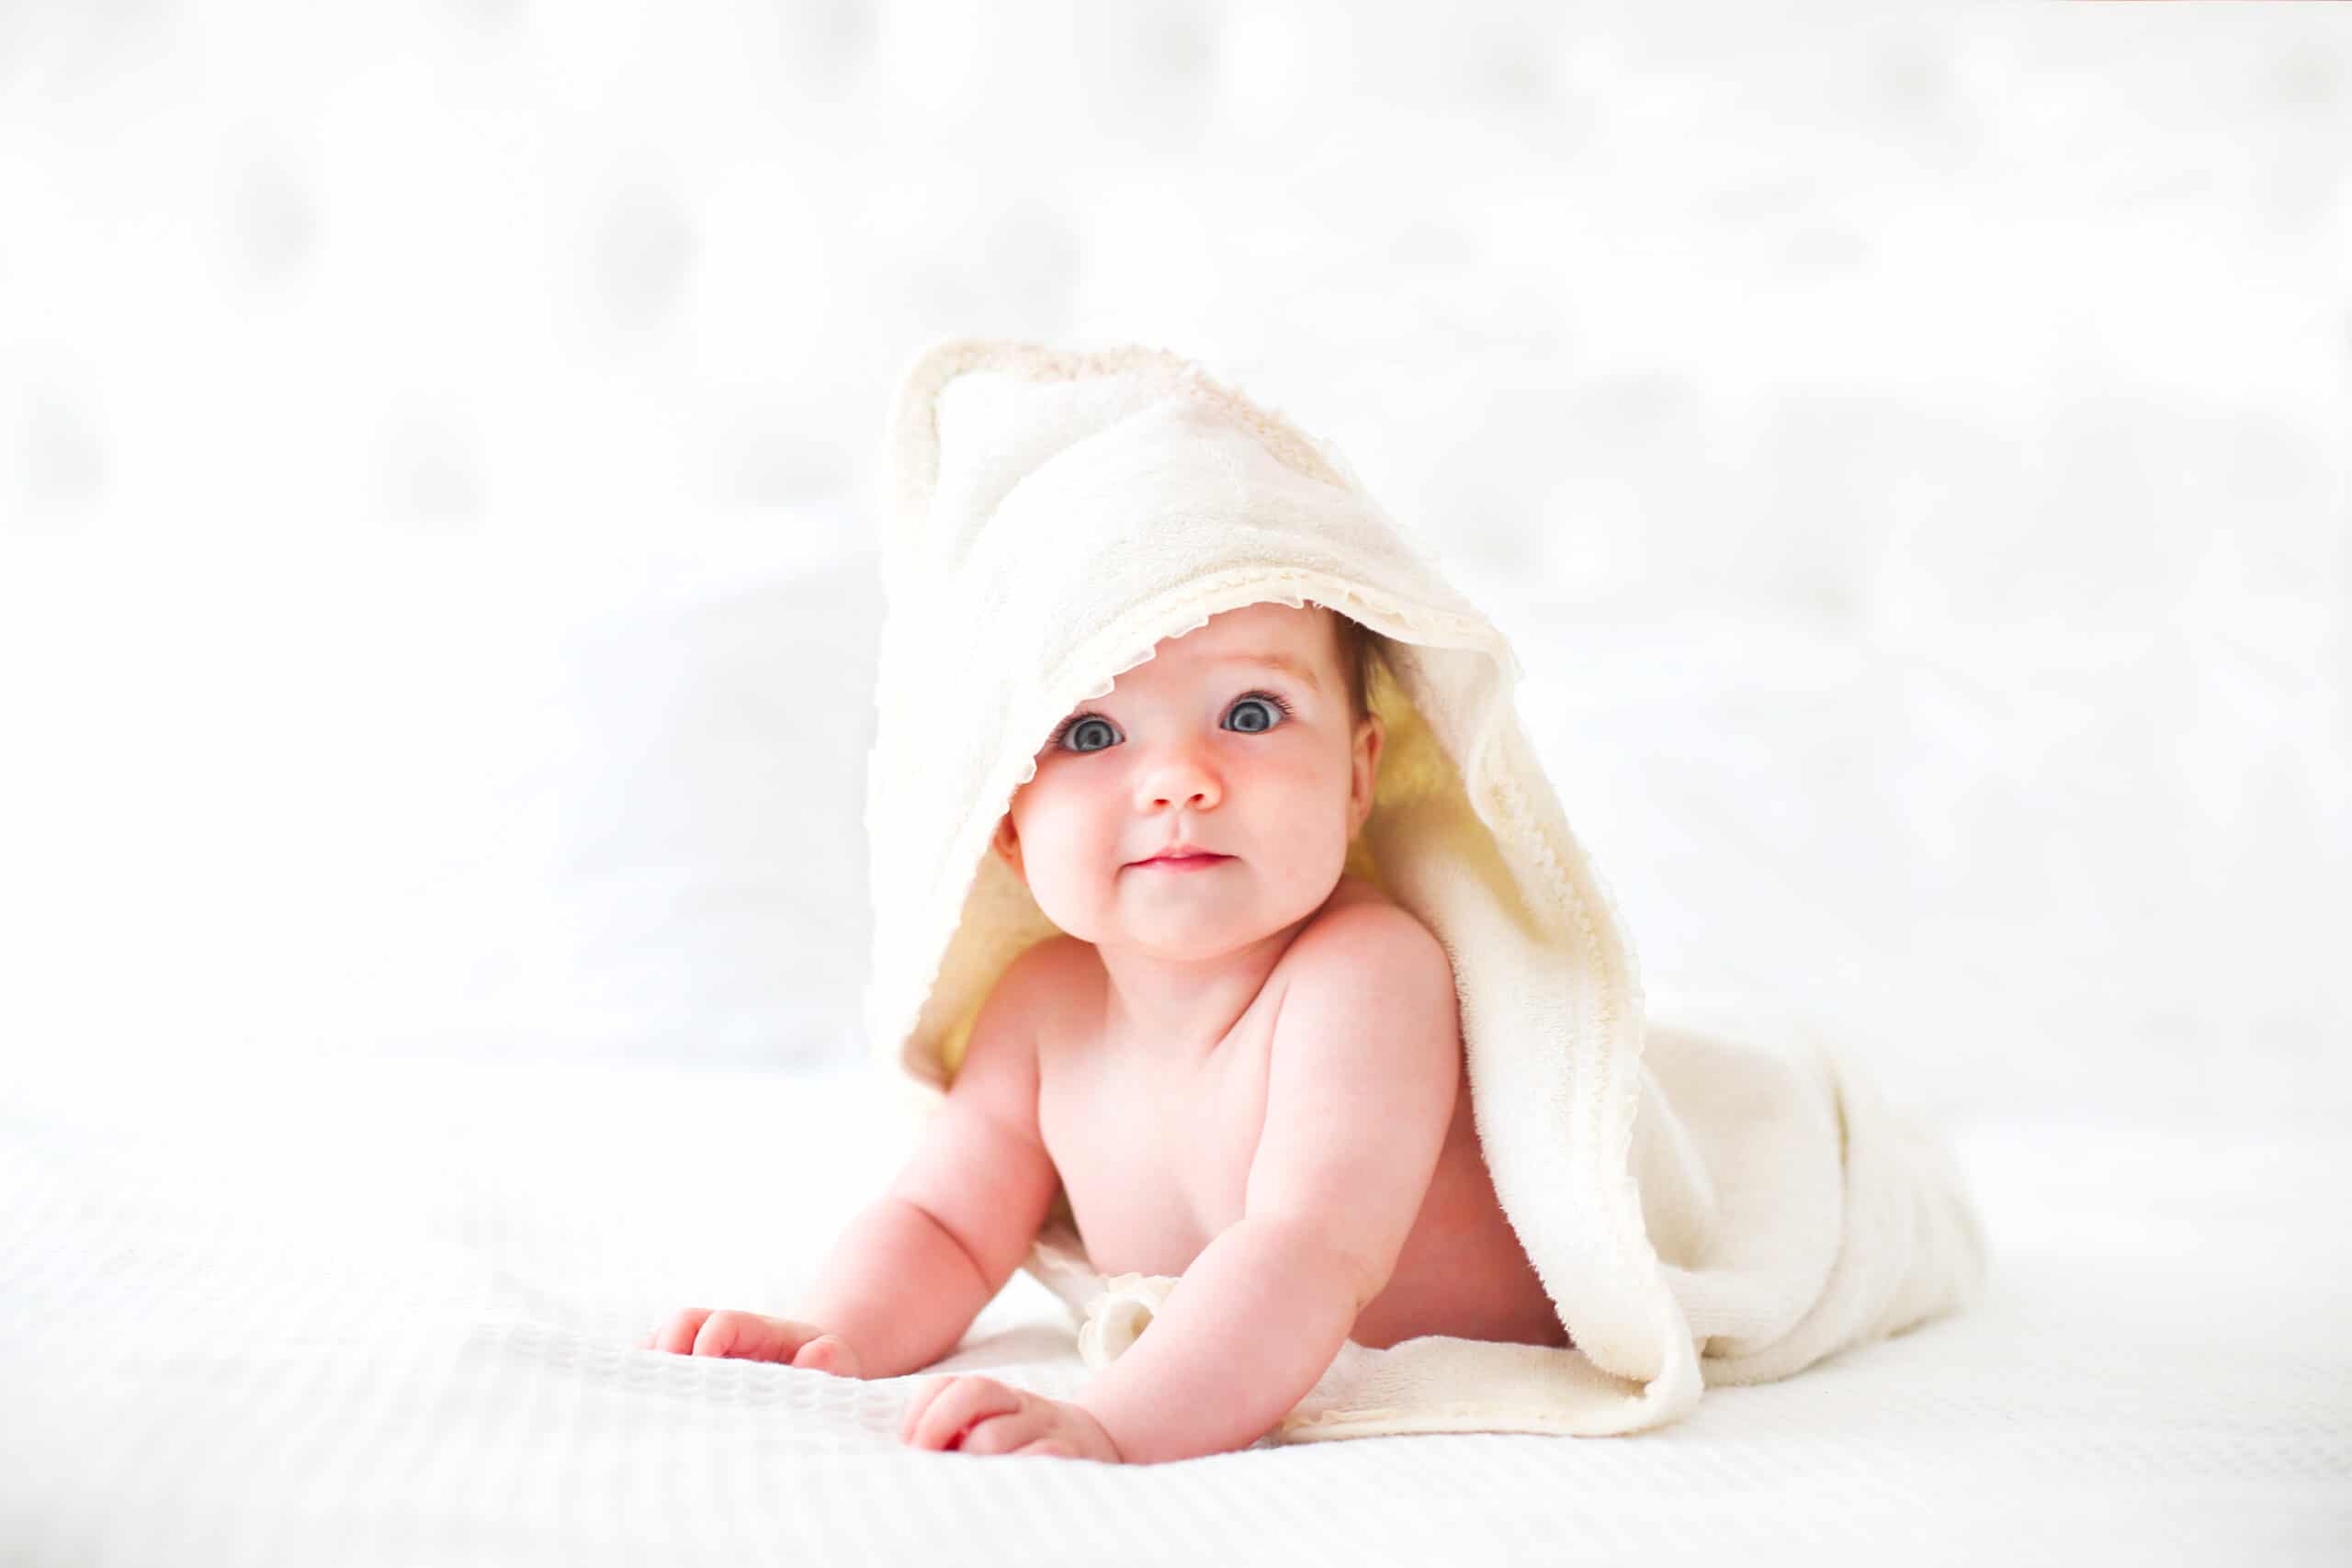 Beautiful & Brilliant Baby Names Beginning With 'B